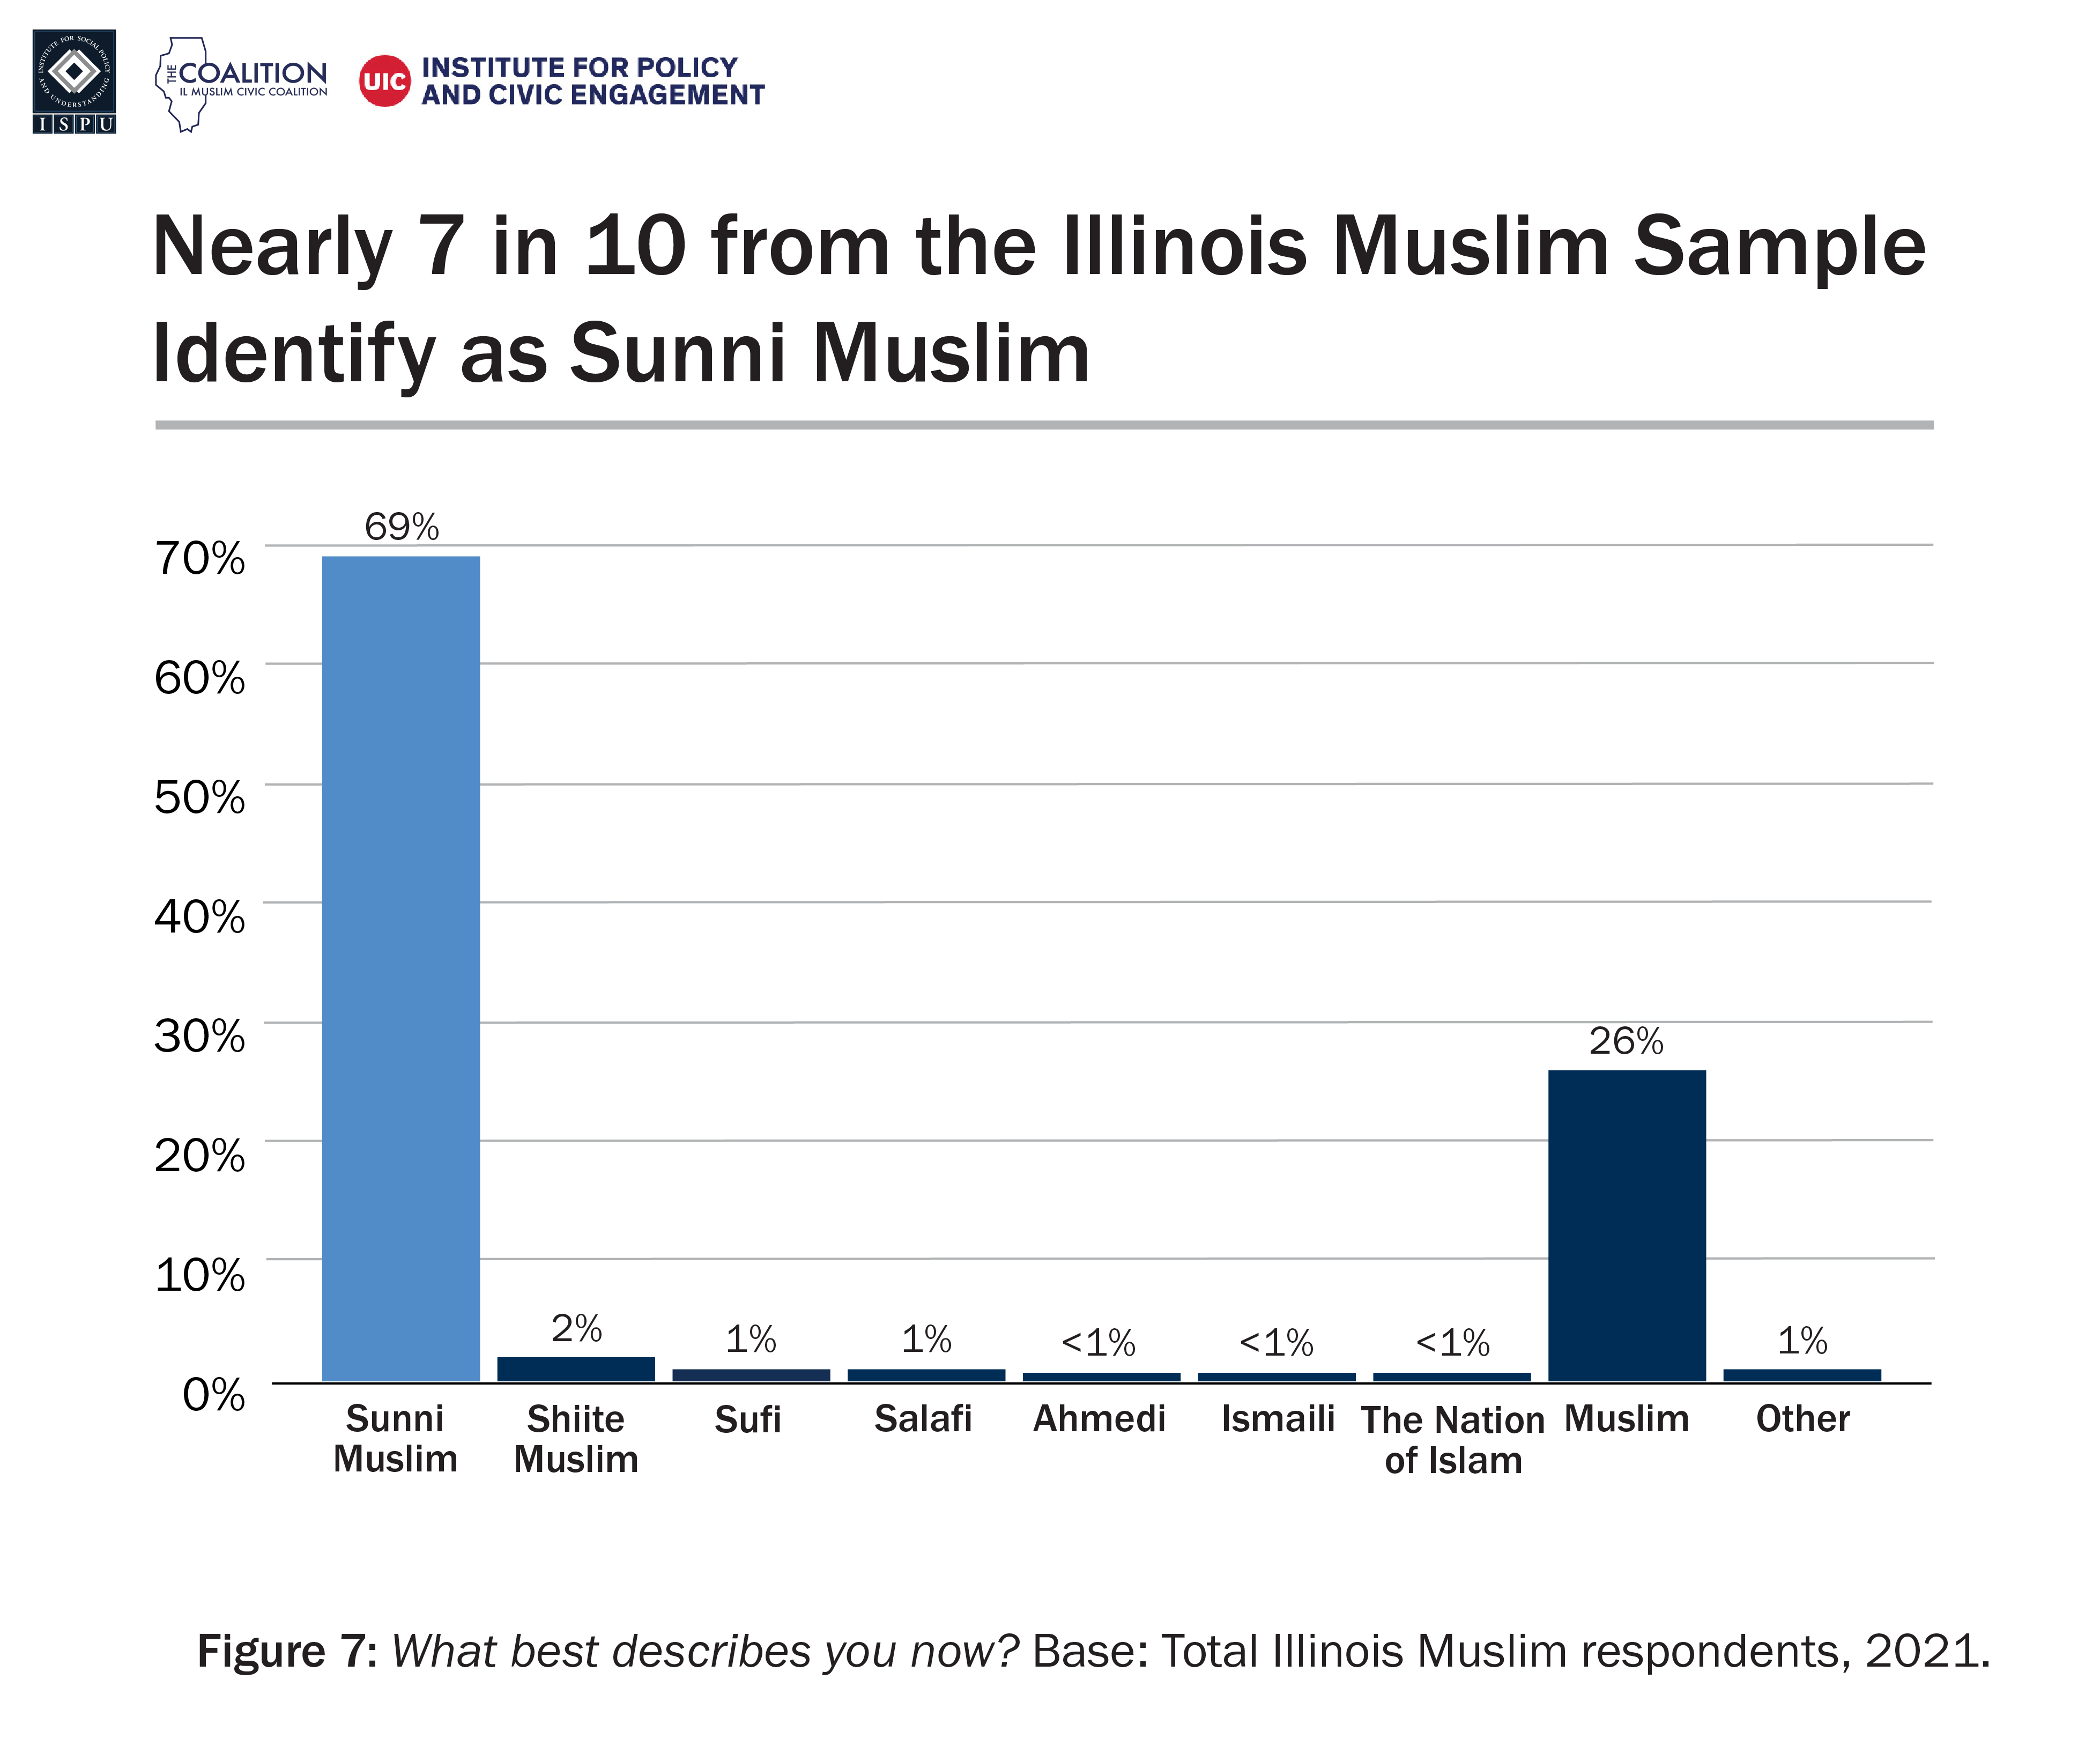 A bar graph showing how the Illinois Muslim sample identifies in terms of religious/sect identity